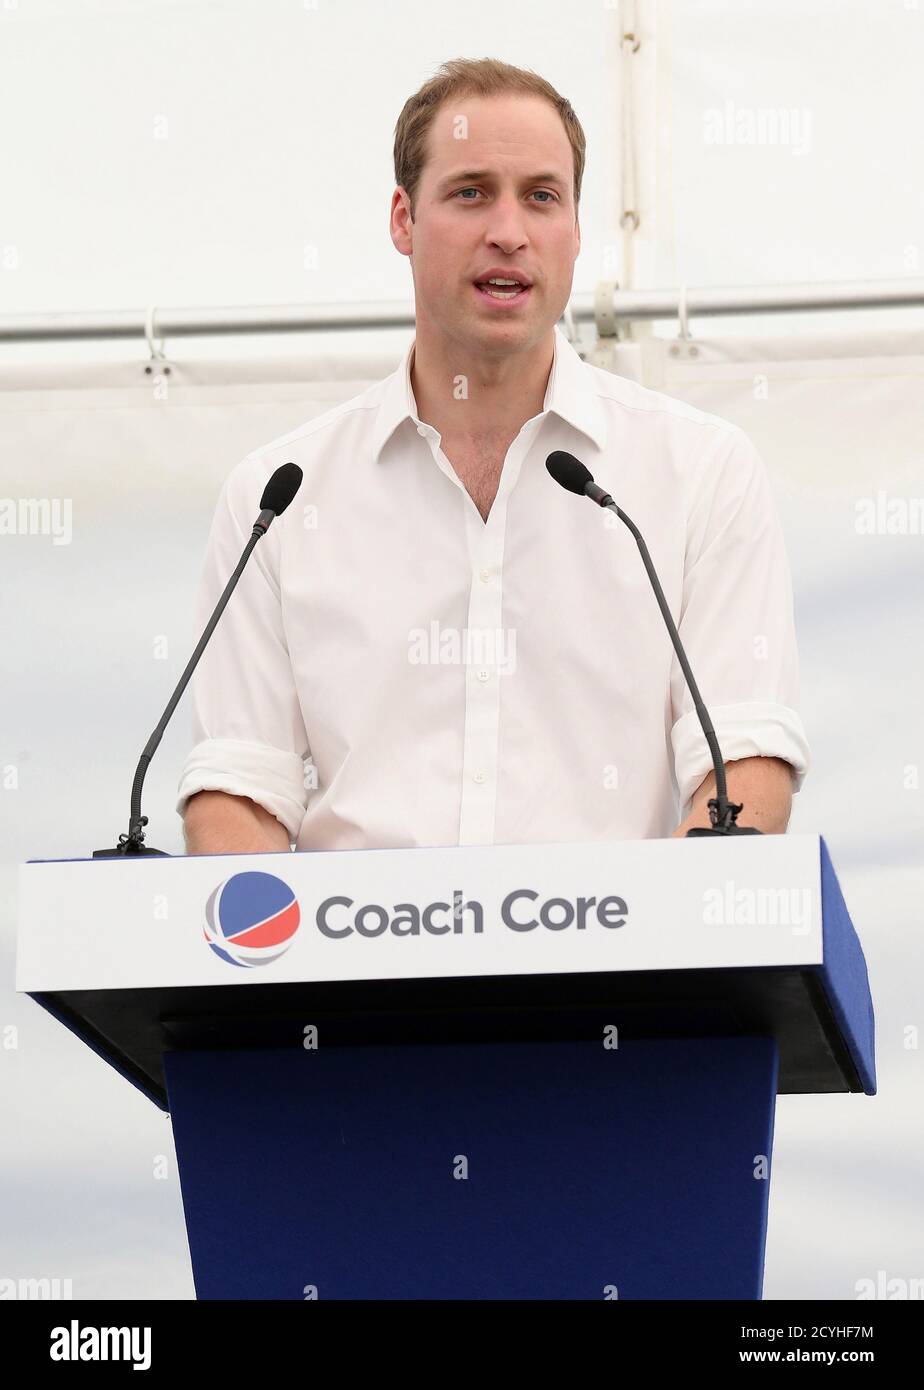 Britain's Prince William gives a speech during a visit to Bacon's college  to launch the Coach core sports programme, which is a partnership between  the Royal Foundation of The Duke and Duchess